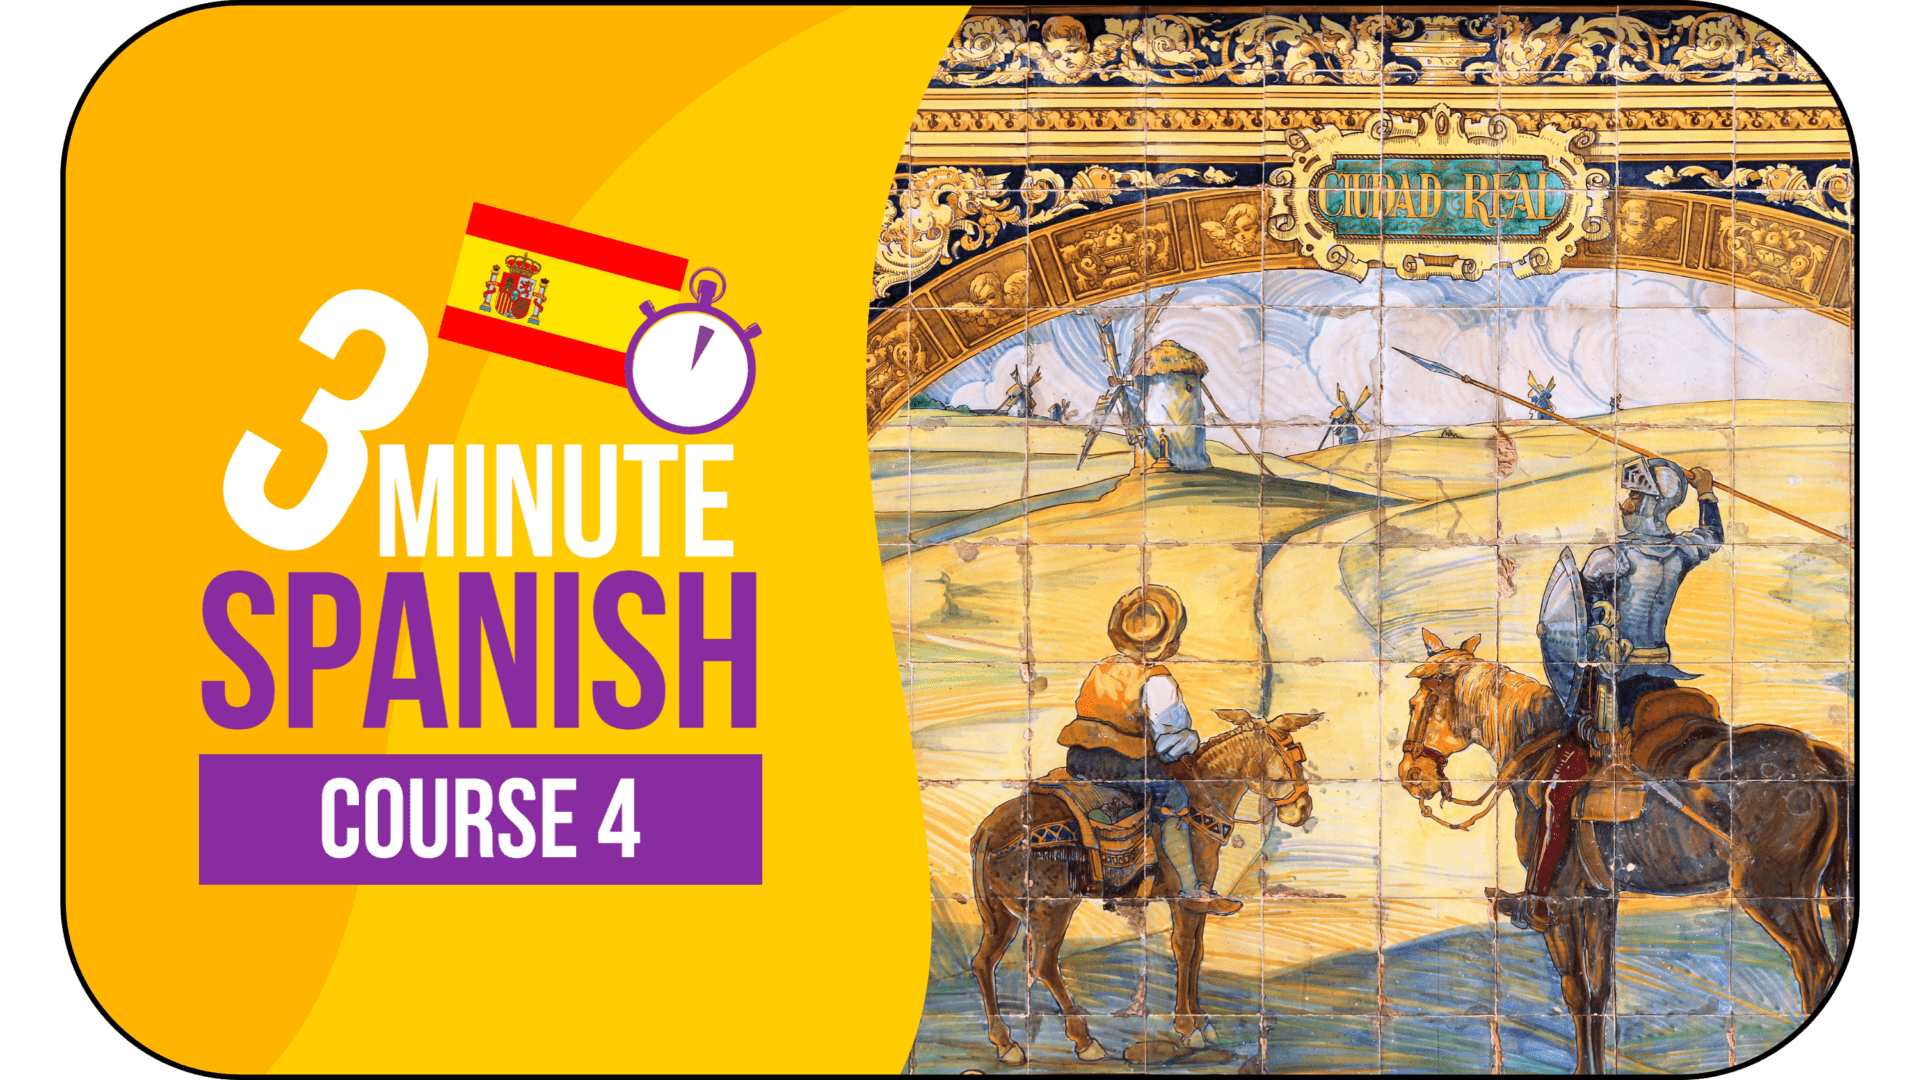 3 Minute Spanish - Course 4